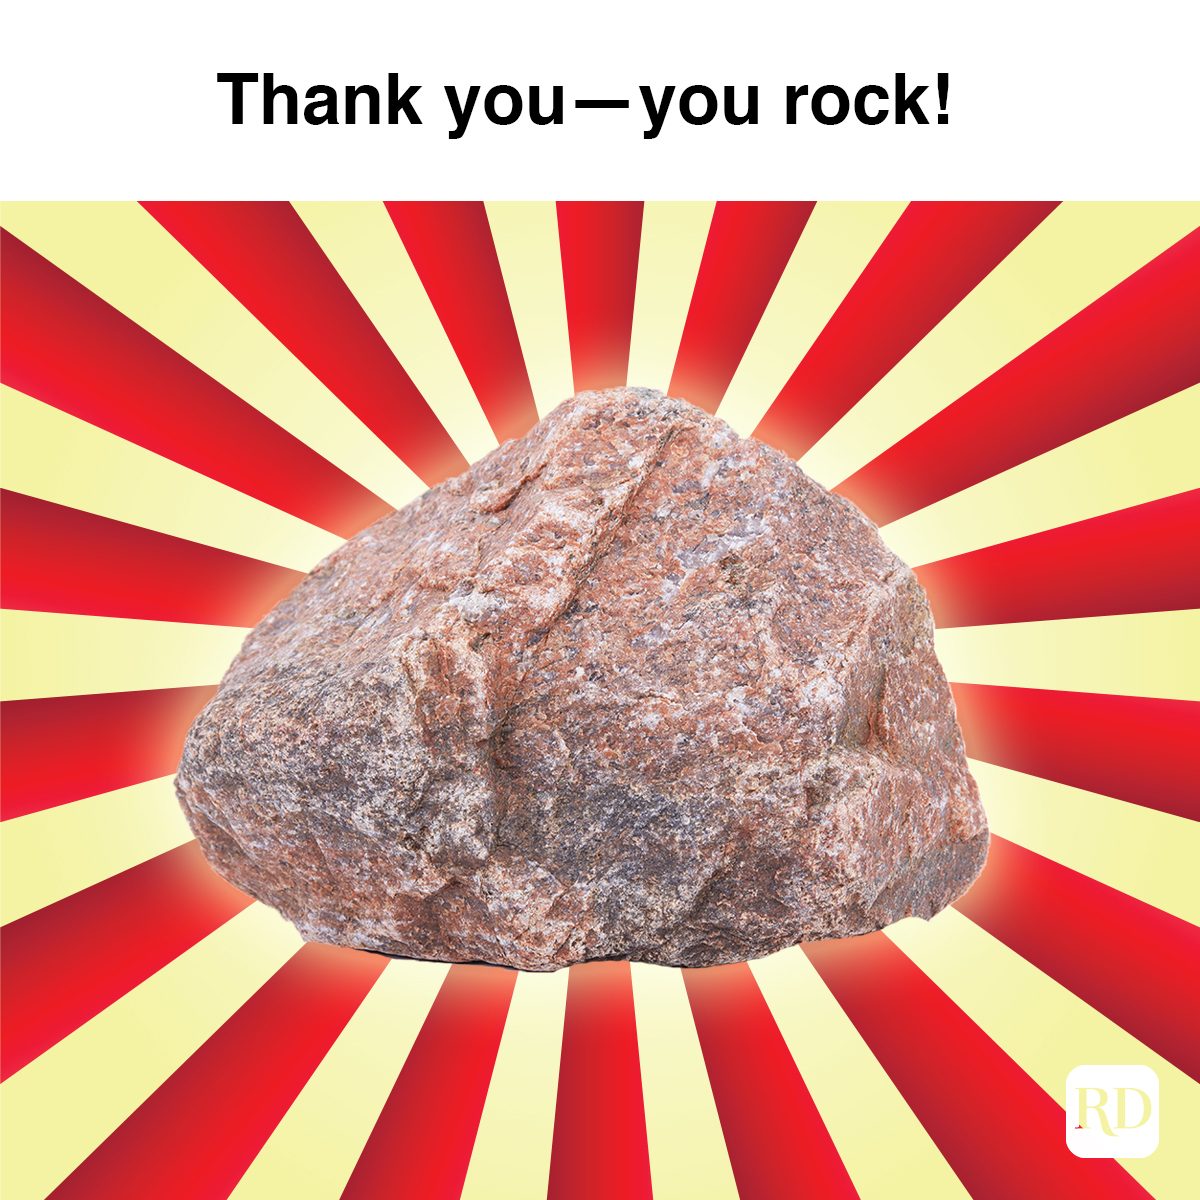 Rock Face Meme Rock GIF - Rock Face Meme Rock What - Discover